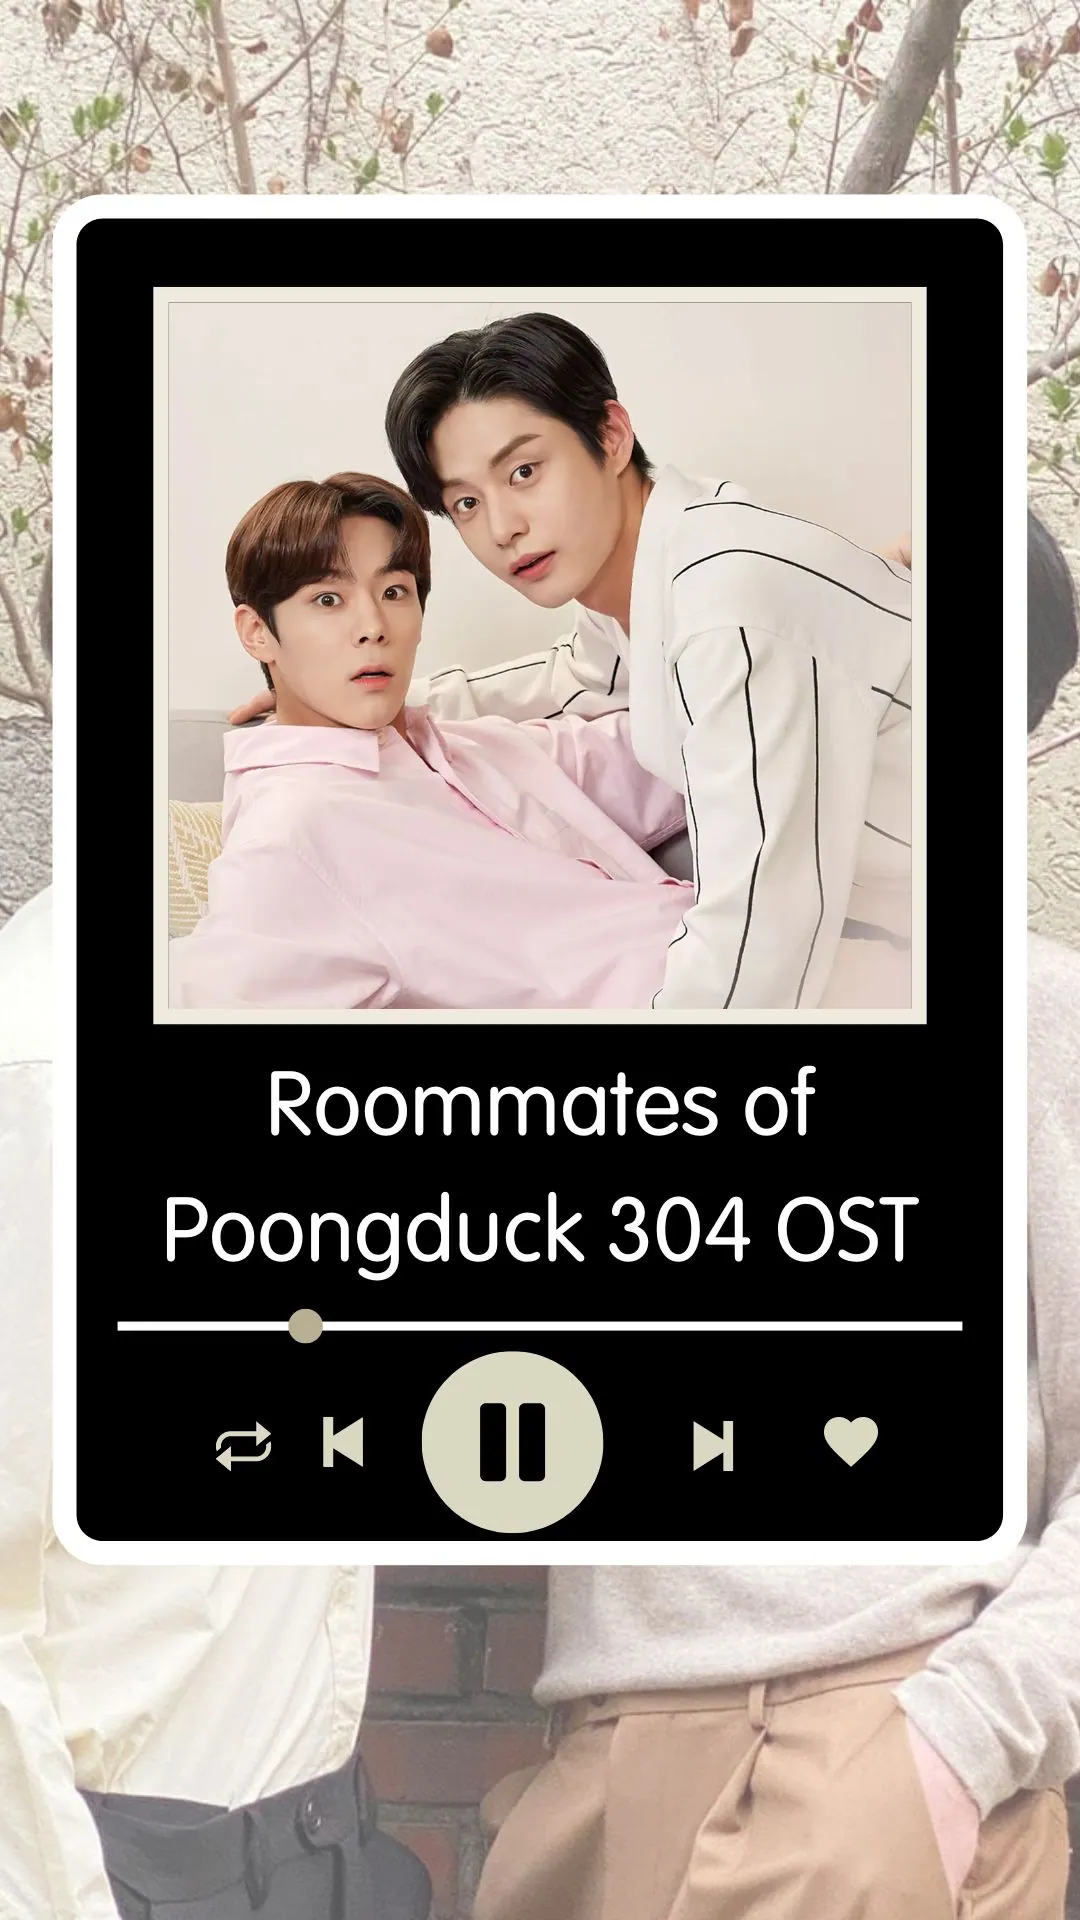 Roommates of Poongduck 304 OST